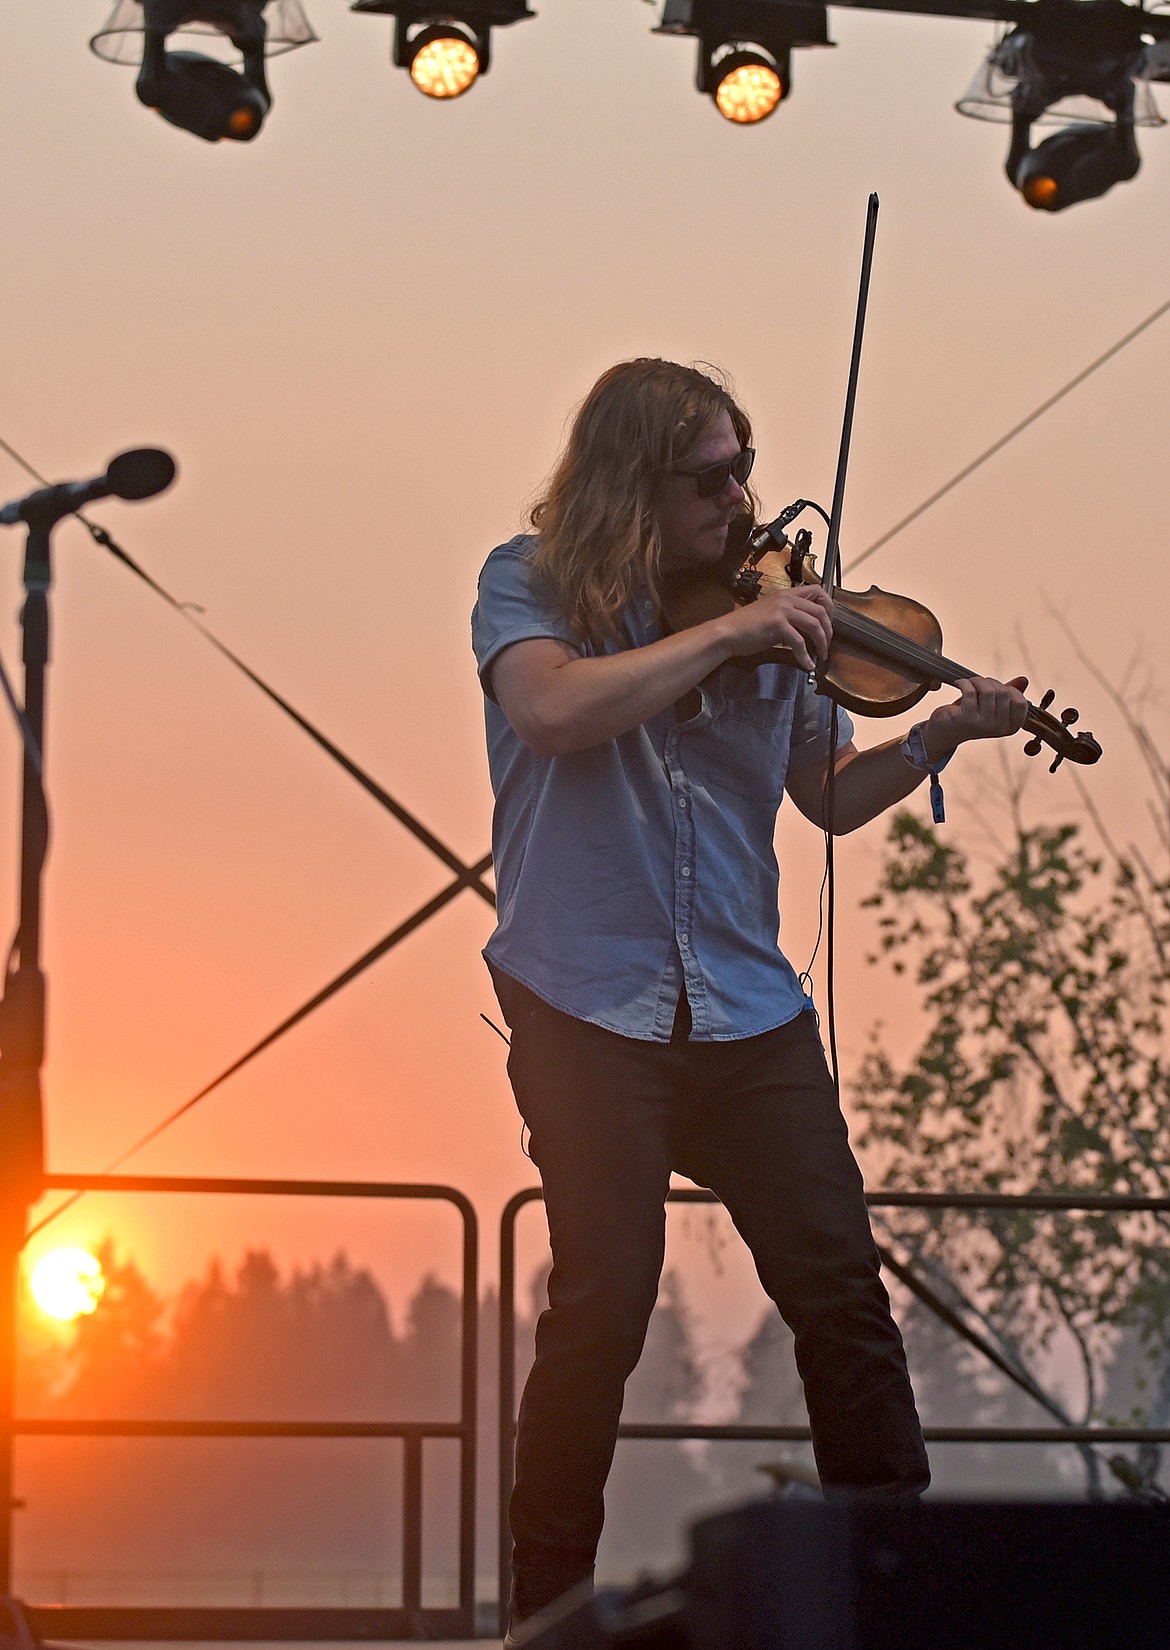 The Lil Smokies fiddlist Jake Simpson plays as the sun sets behind him at the Under The Big Sky Festival in Whitefish on Saturday. (Whitney England/Whitefish Pilot)